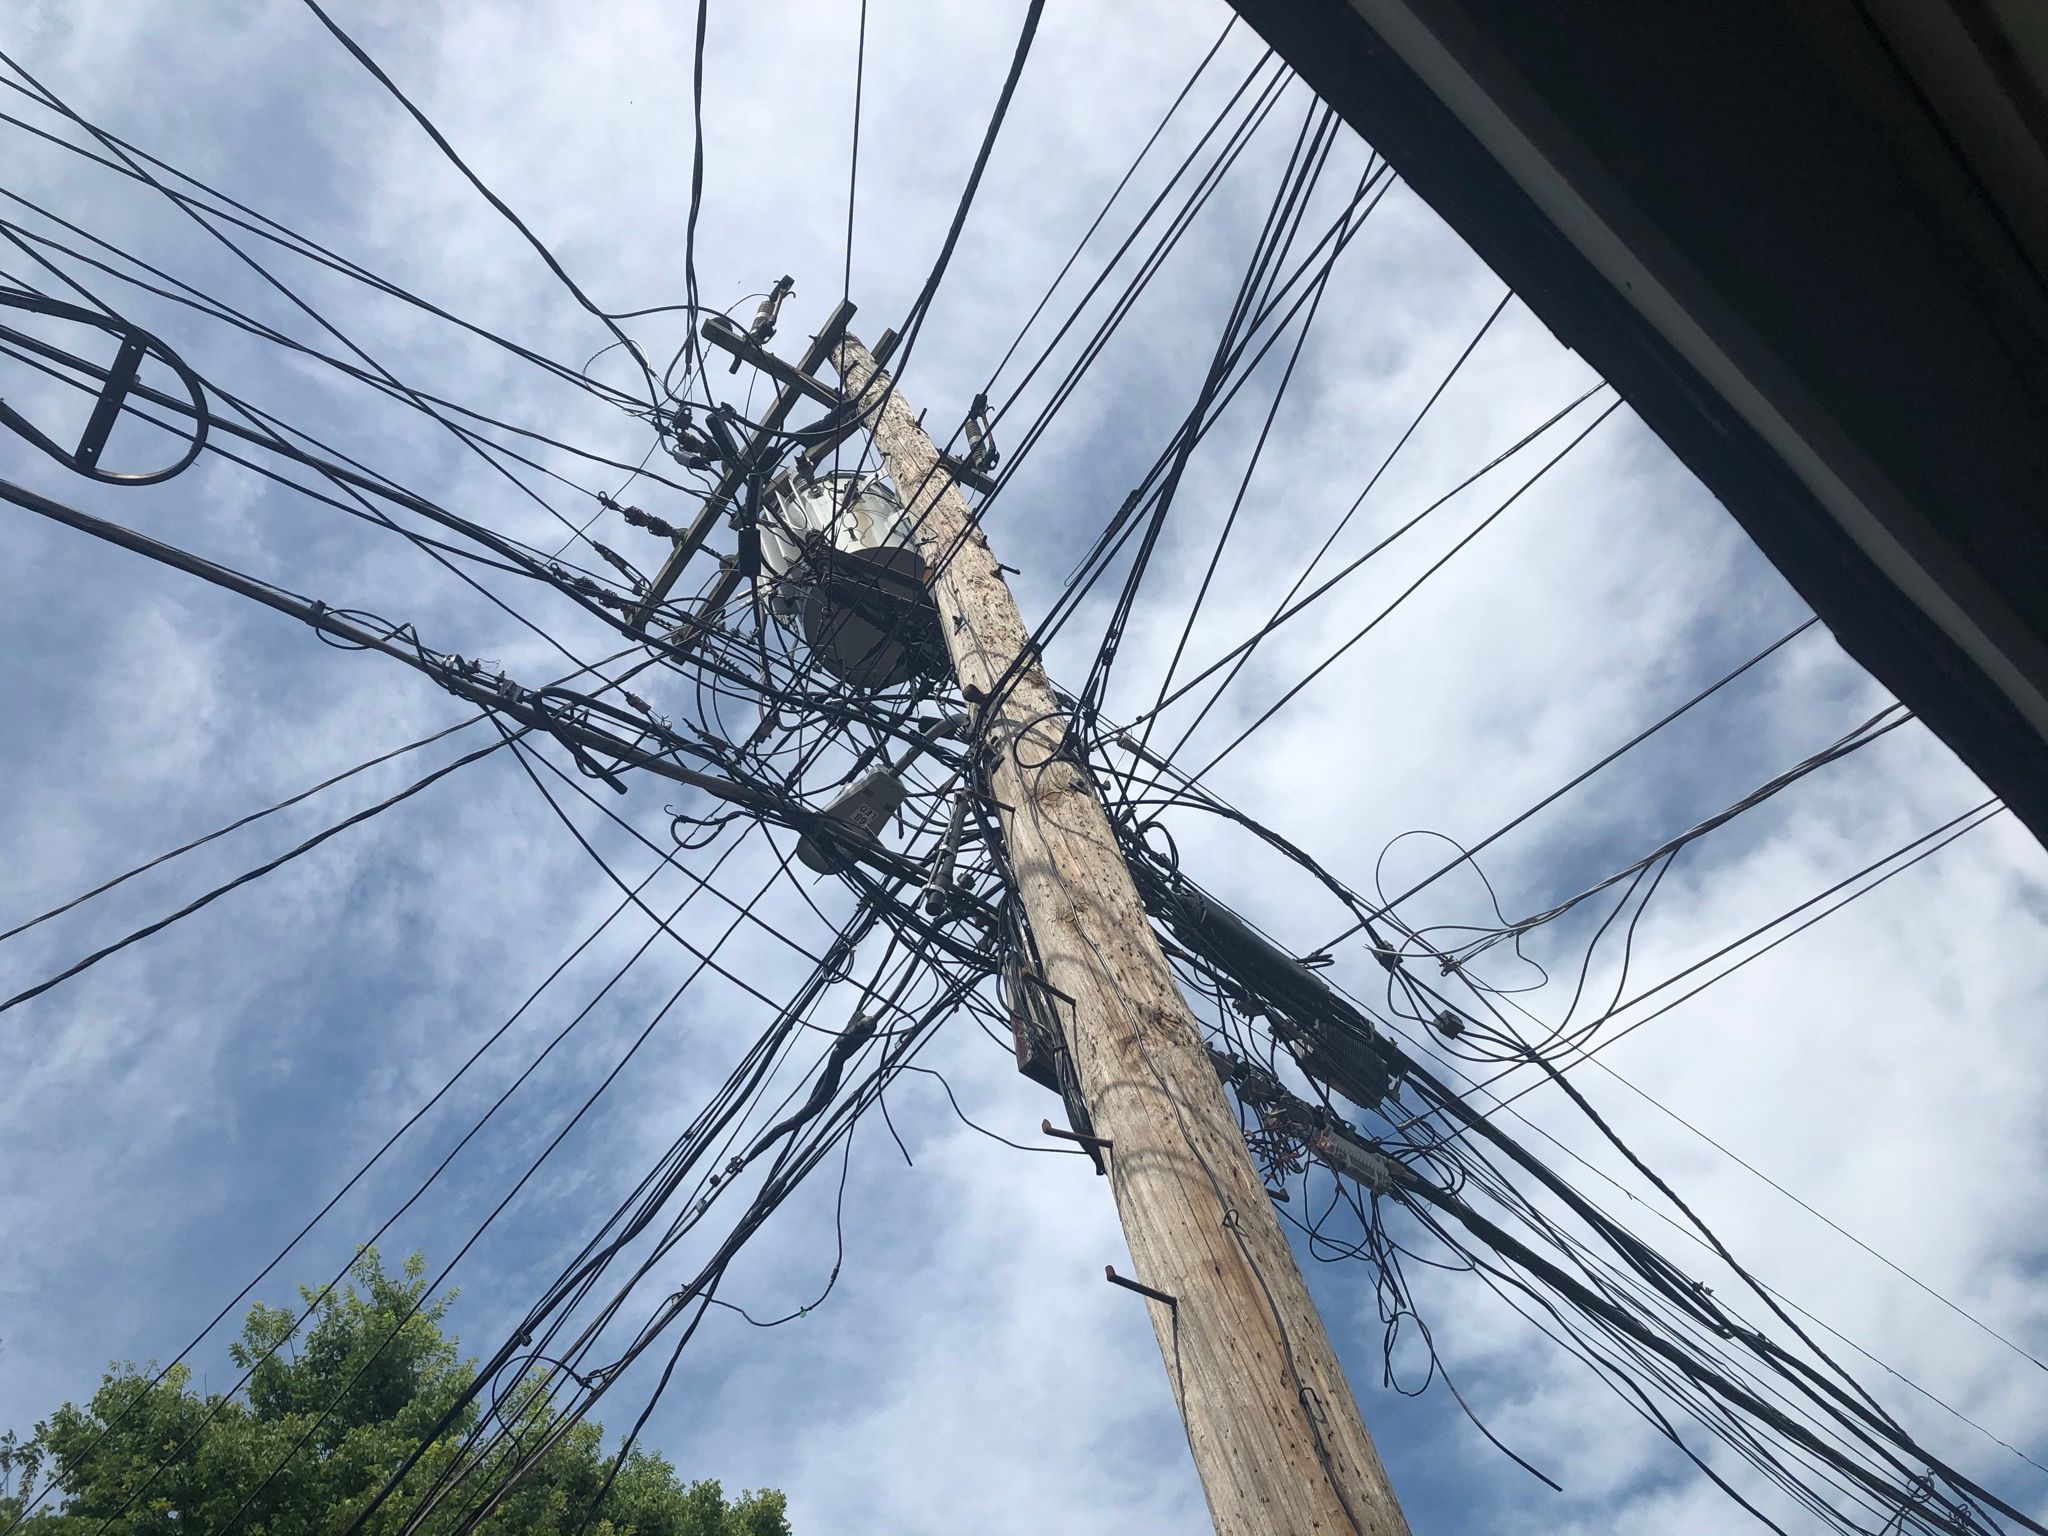 Several lines connected to a single pole